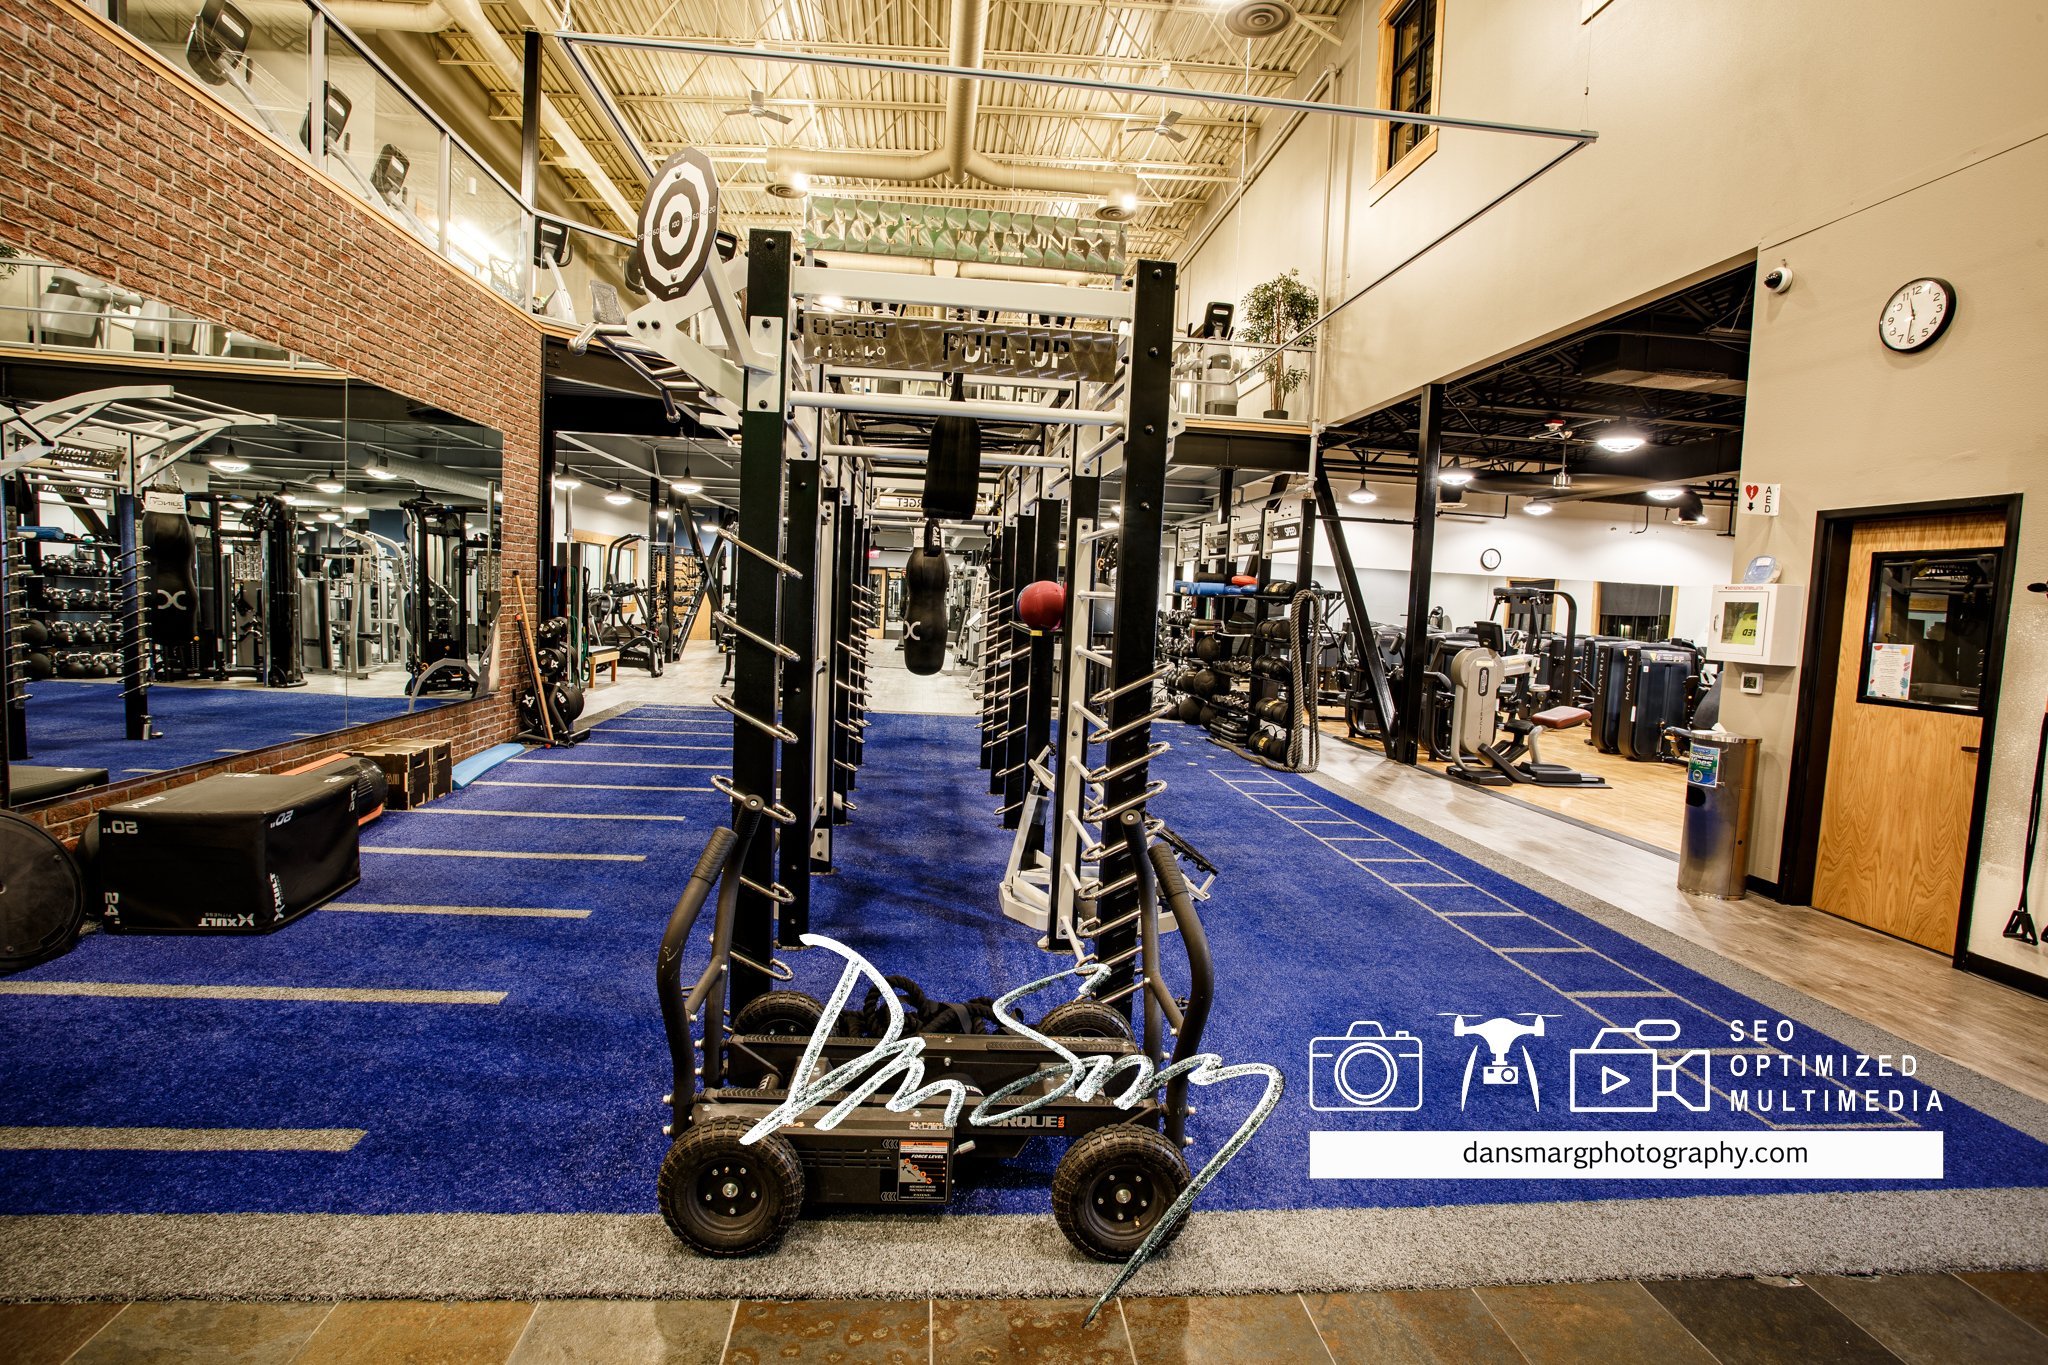 DanSmargPhotography.com-SEO-Optimmized-Multimedia-Content-The-Wave-Fitness-Center-Whitefish-Montana-35.jpg